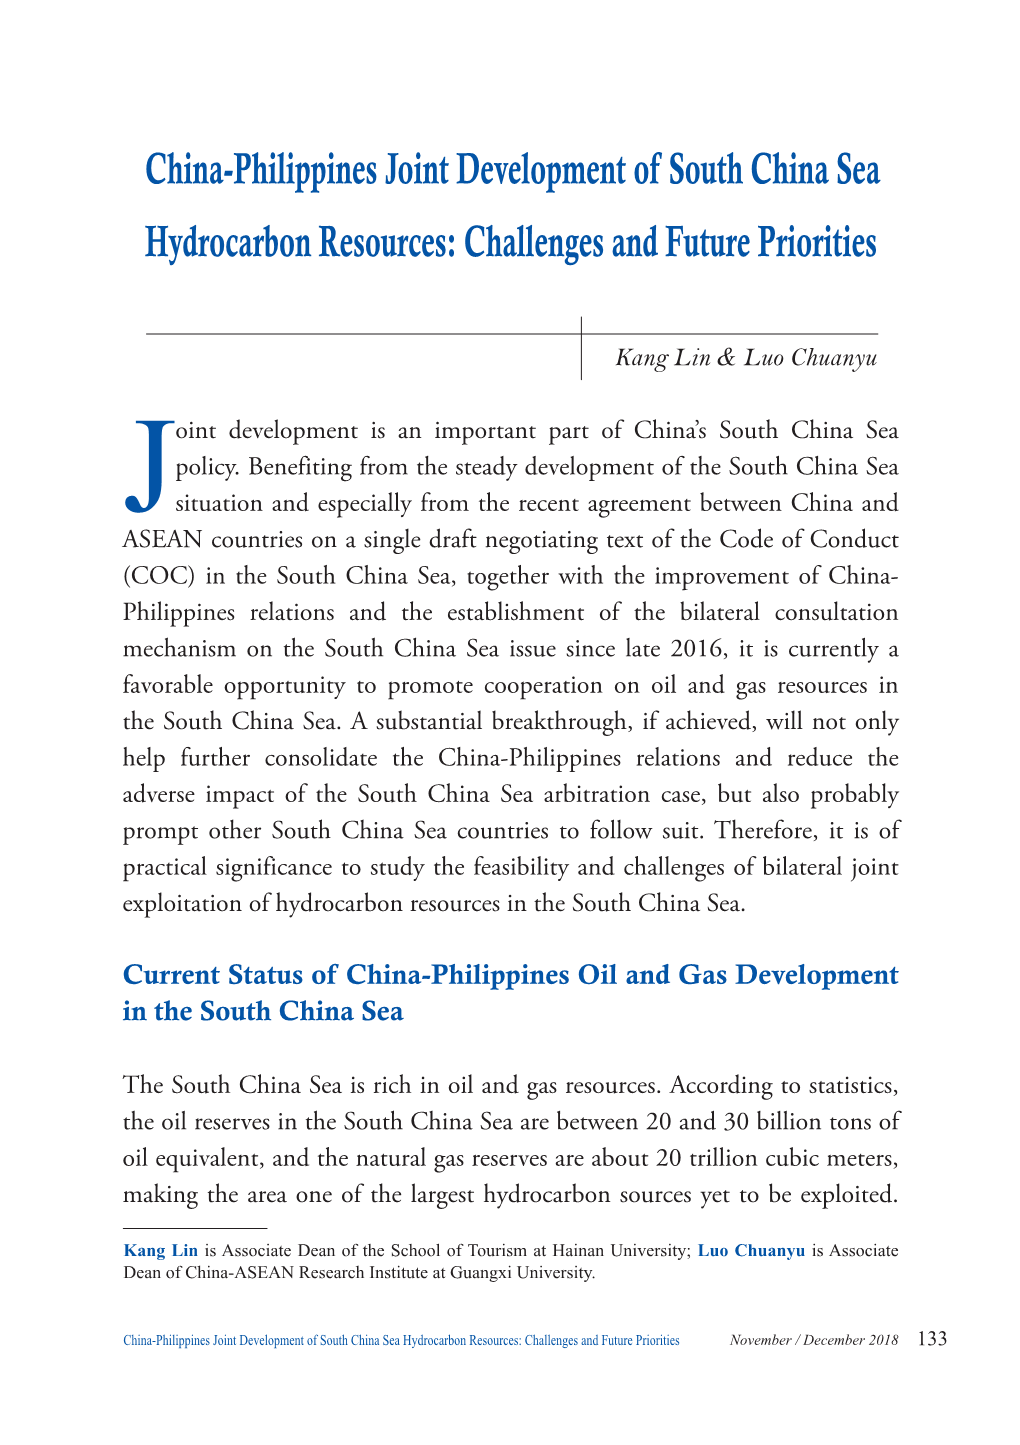 China-Philippines Joint Development of South China Sea Hydrocarbon Resources: Challenges and Future Priorities